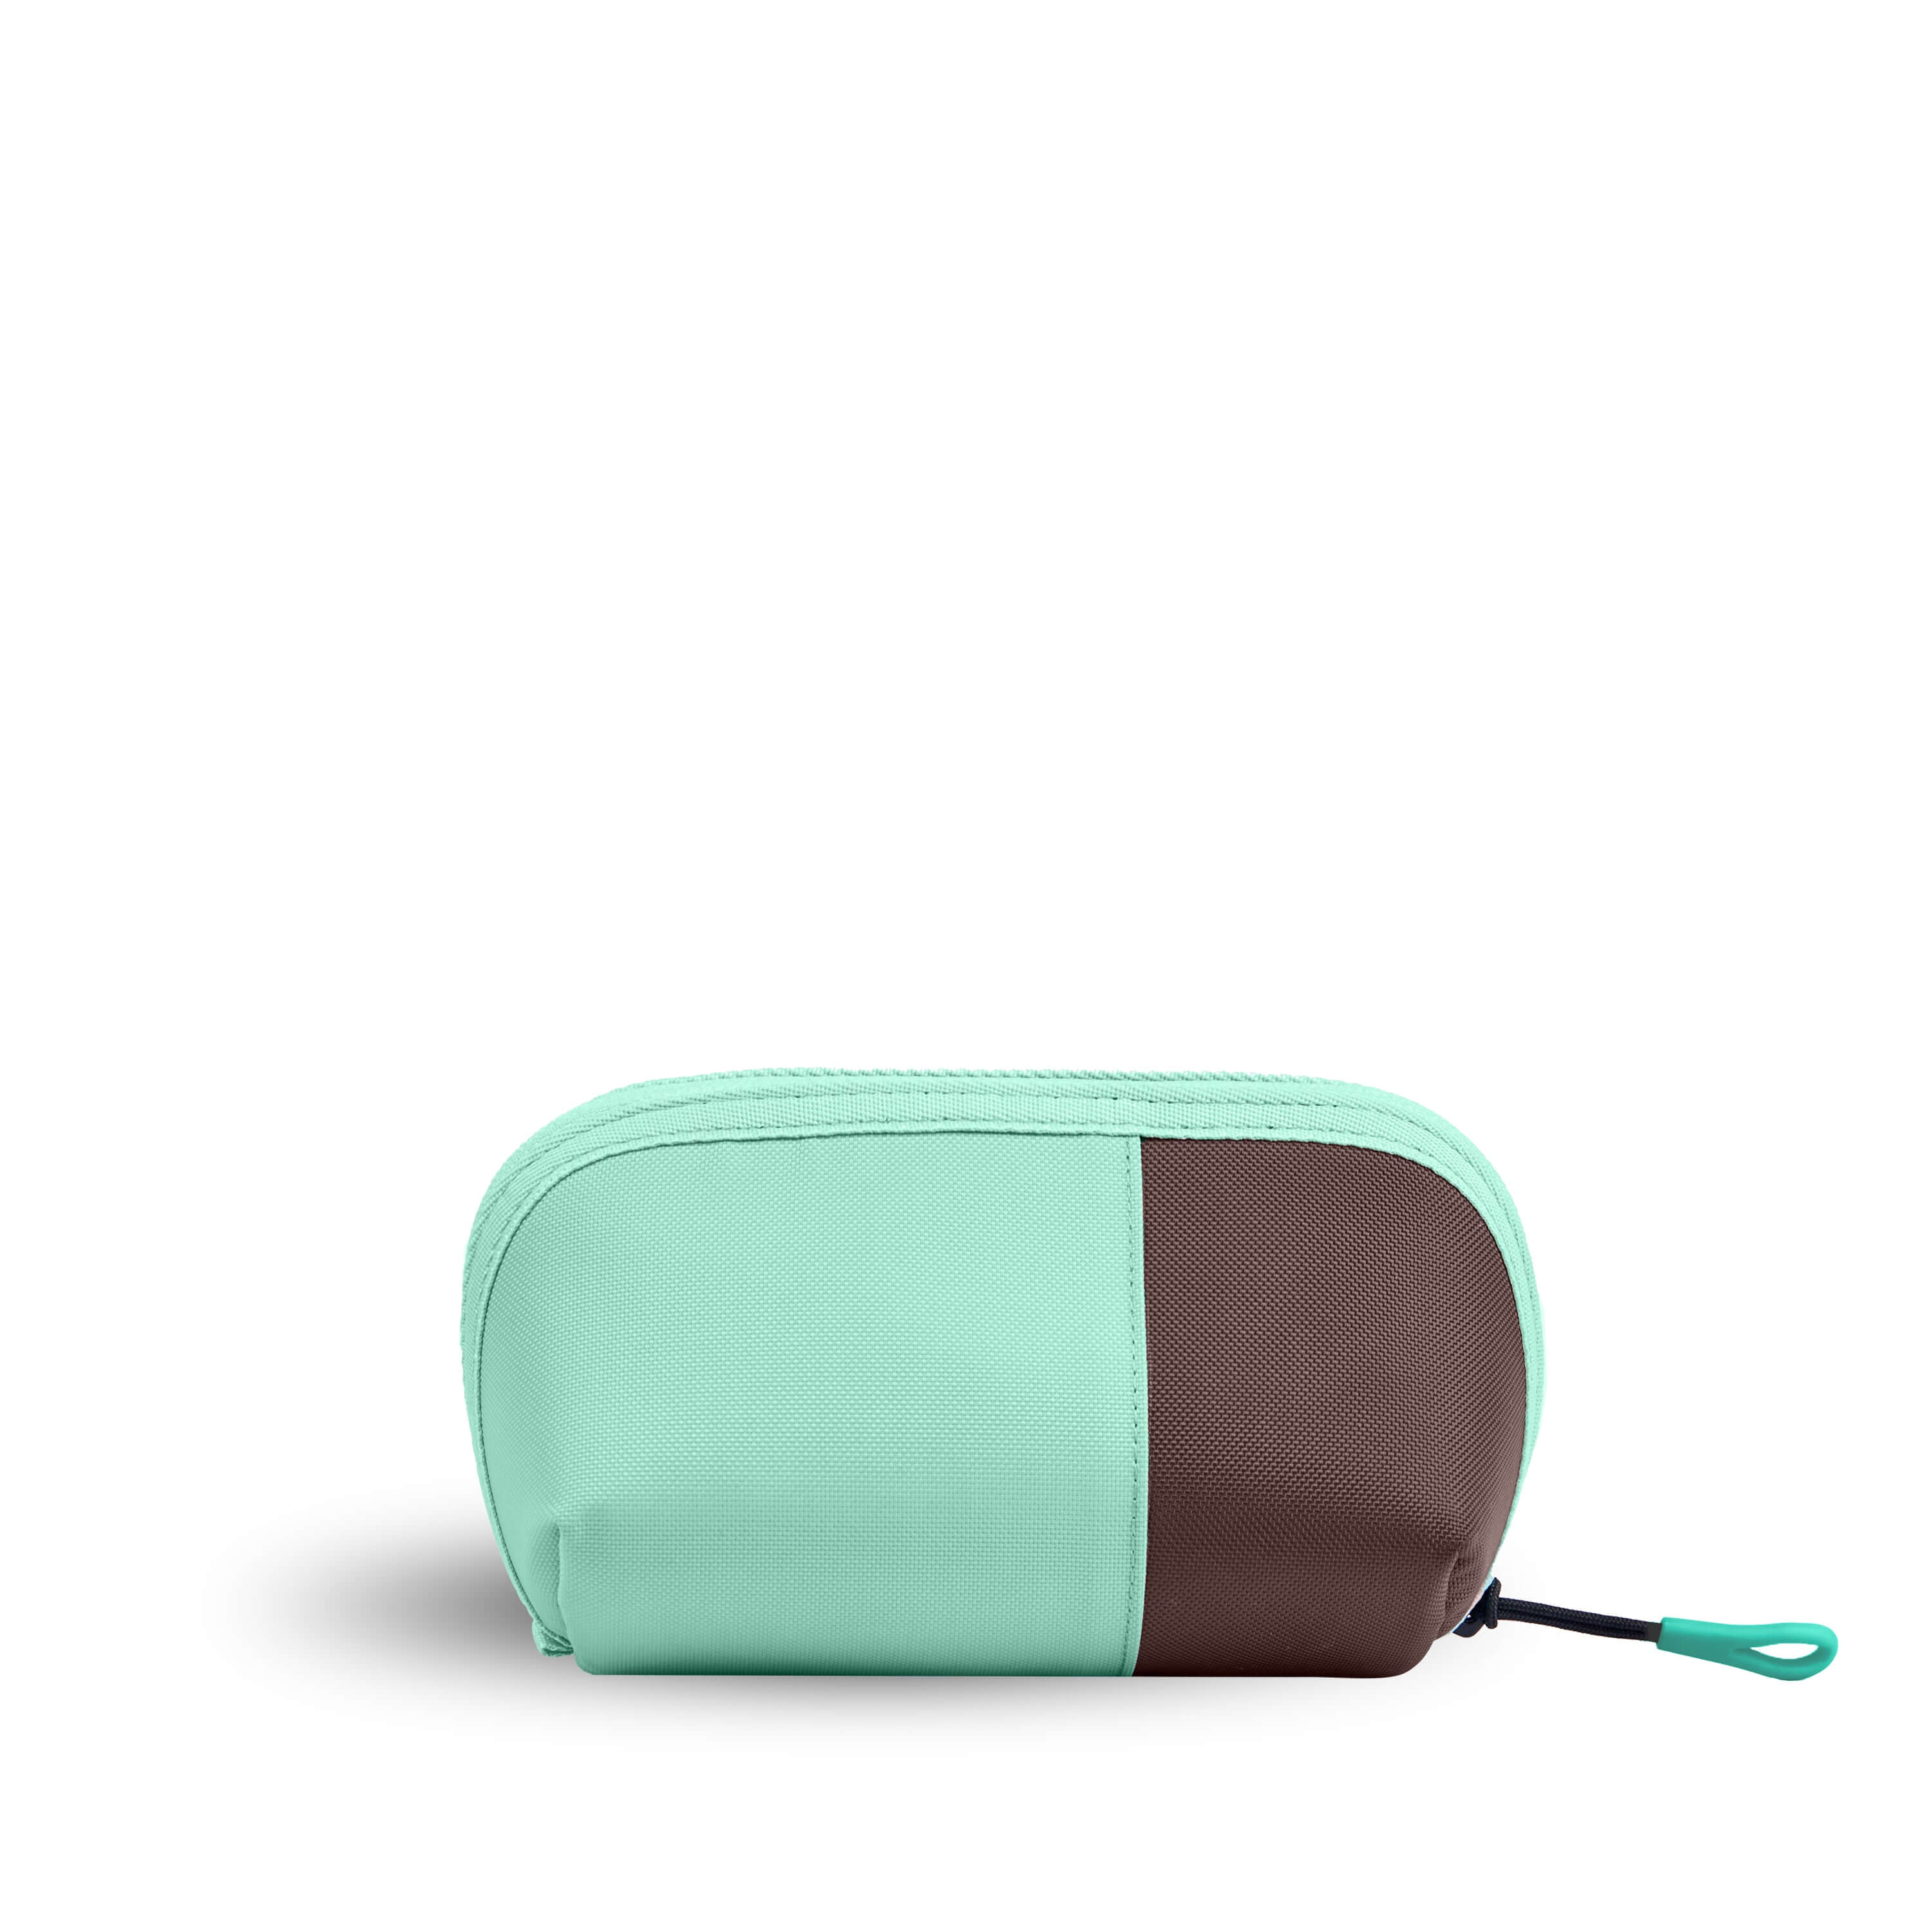 Back view of Sherpani travel accessory the Harmony in Seagreen. The pouch is two-toned in light green and brown. 